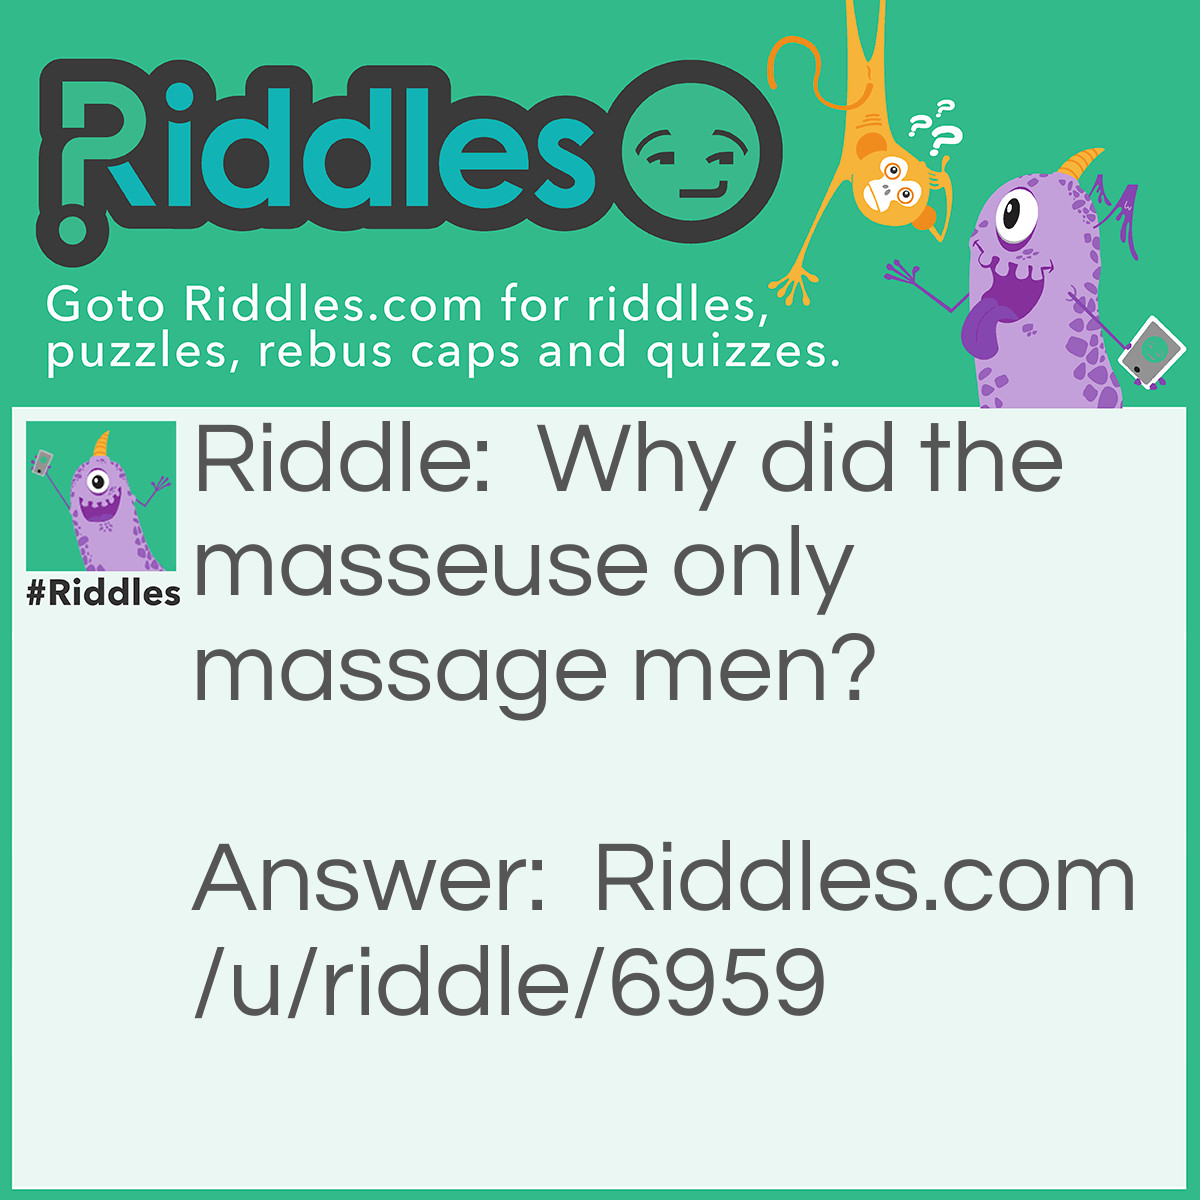 Riddle: Why did the masseuse only massage men? Answer: Because he was massagonistic (misogynistic).